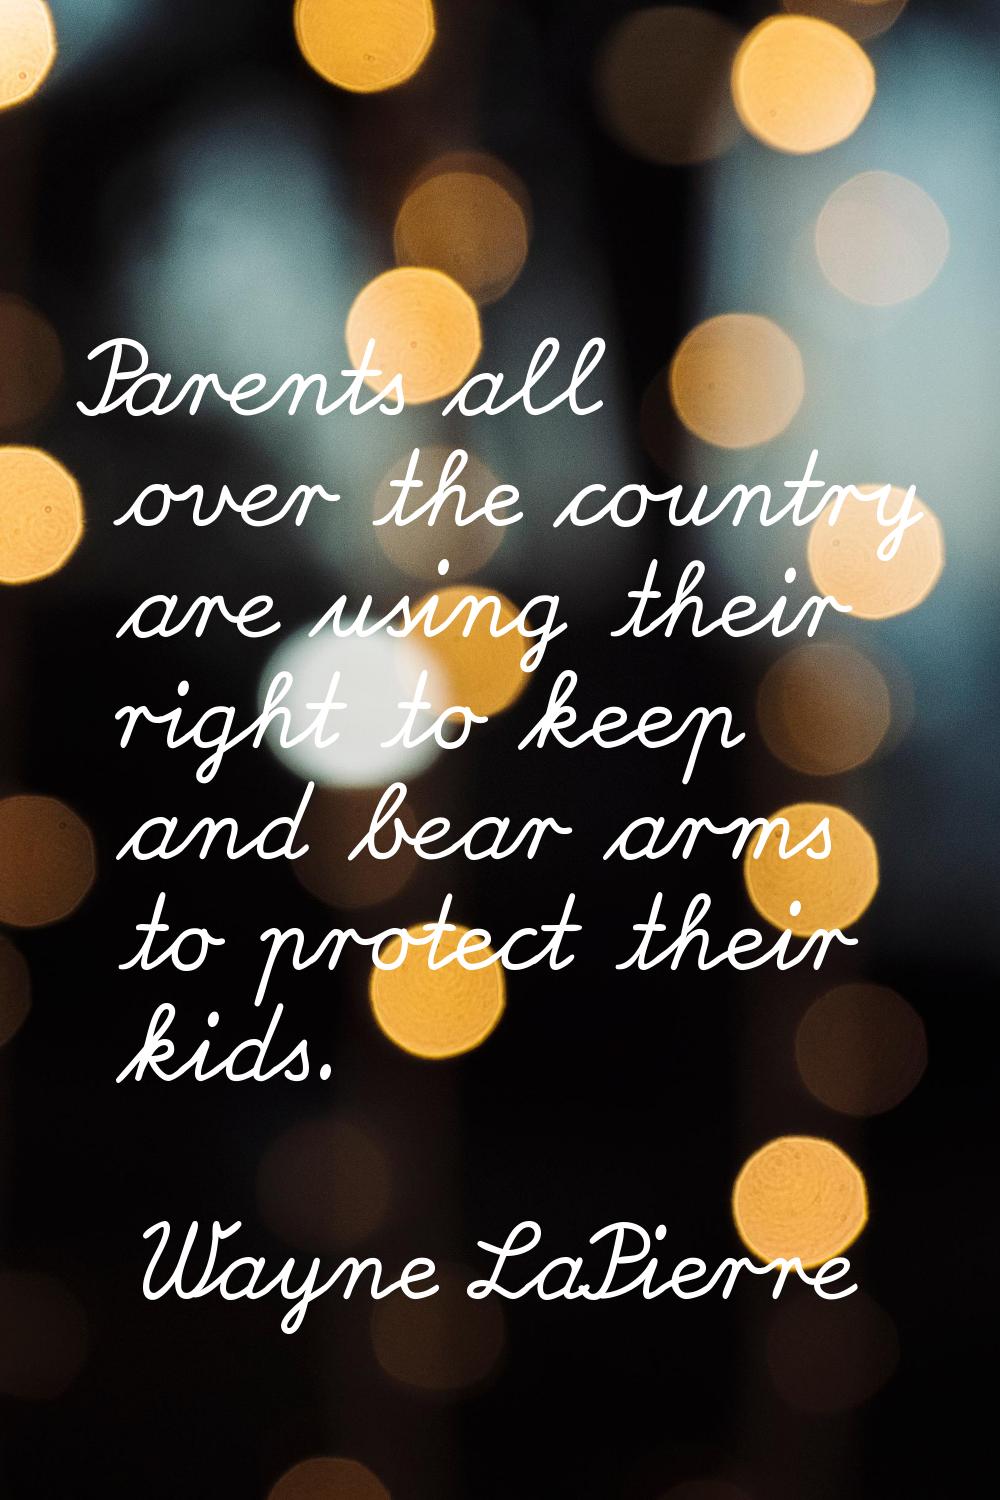 Parents all over the country are using their right to keep and bear arms to protect their kids.